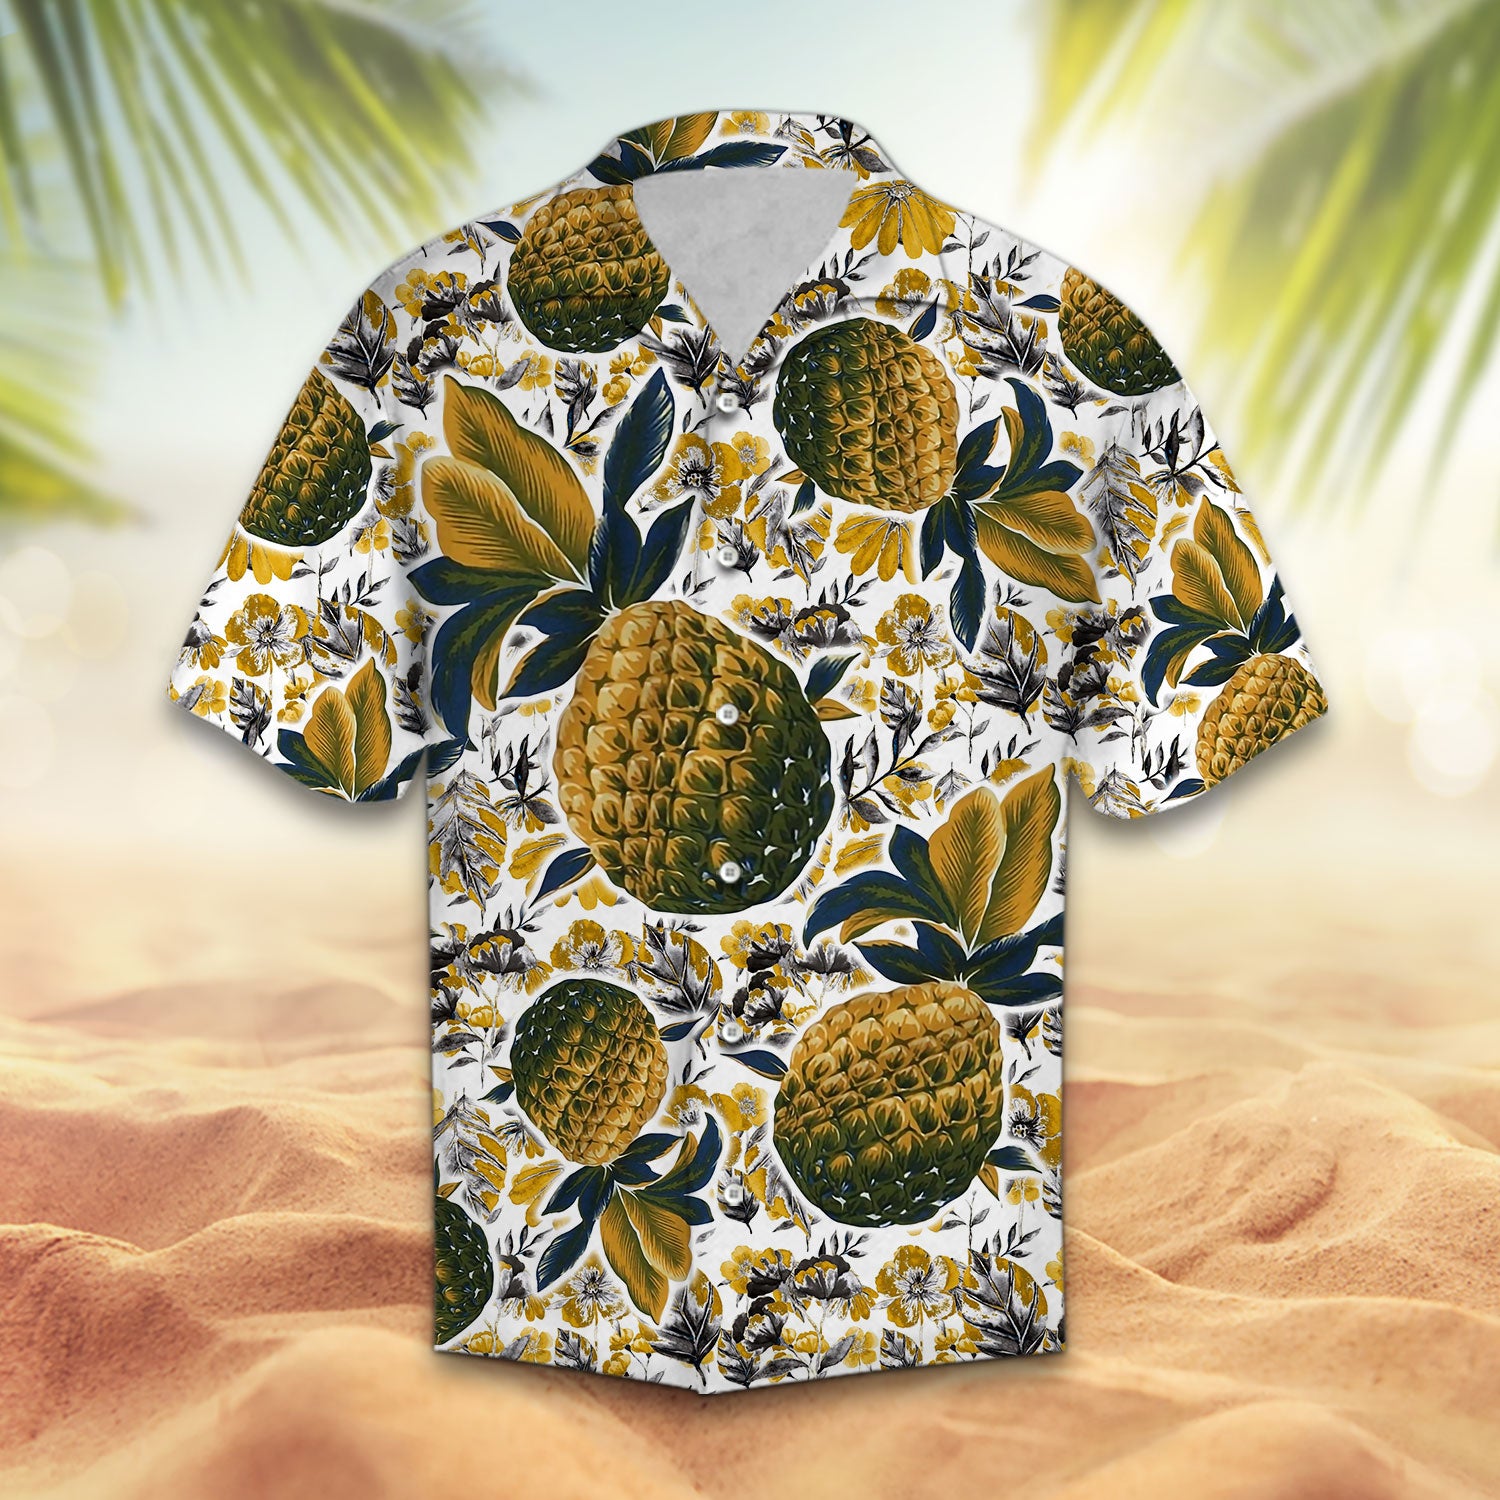 Vintage Pineapple Beach Hawaiian Shirt for Men & Women, Couples Matching, Funny Friends & Family Aloha Shirt Gifts (Plus Size Available)